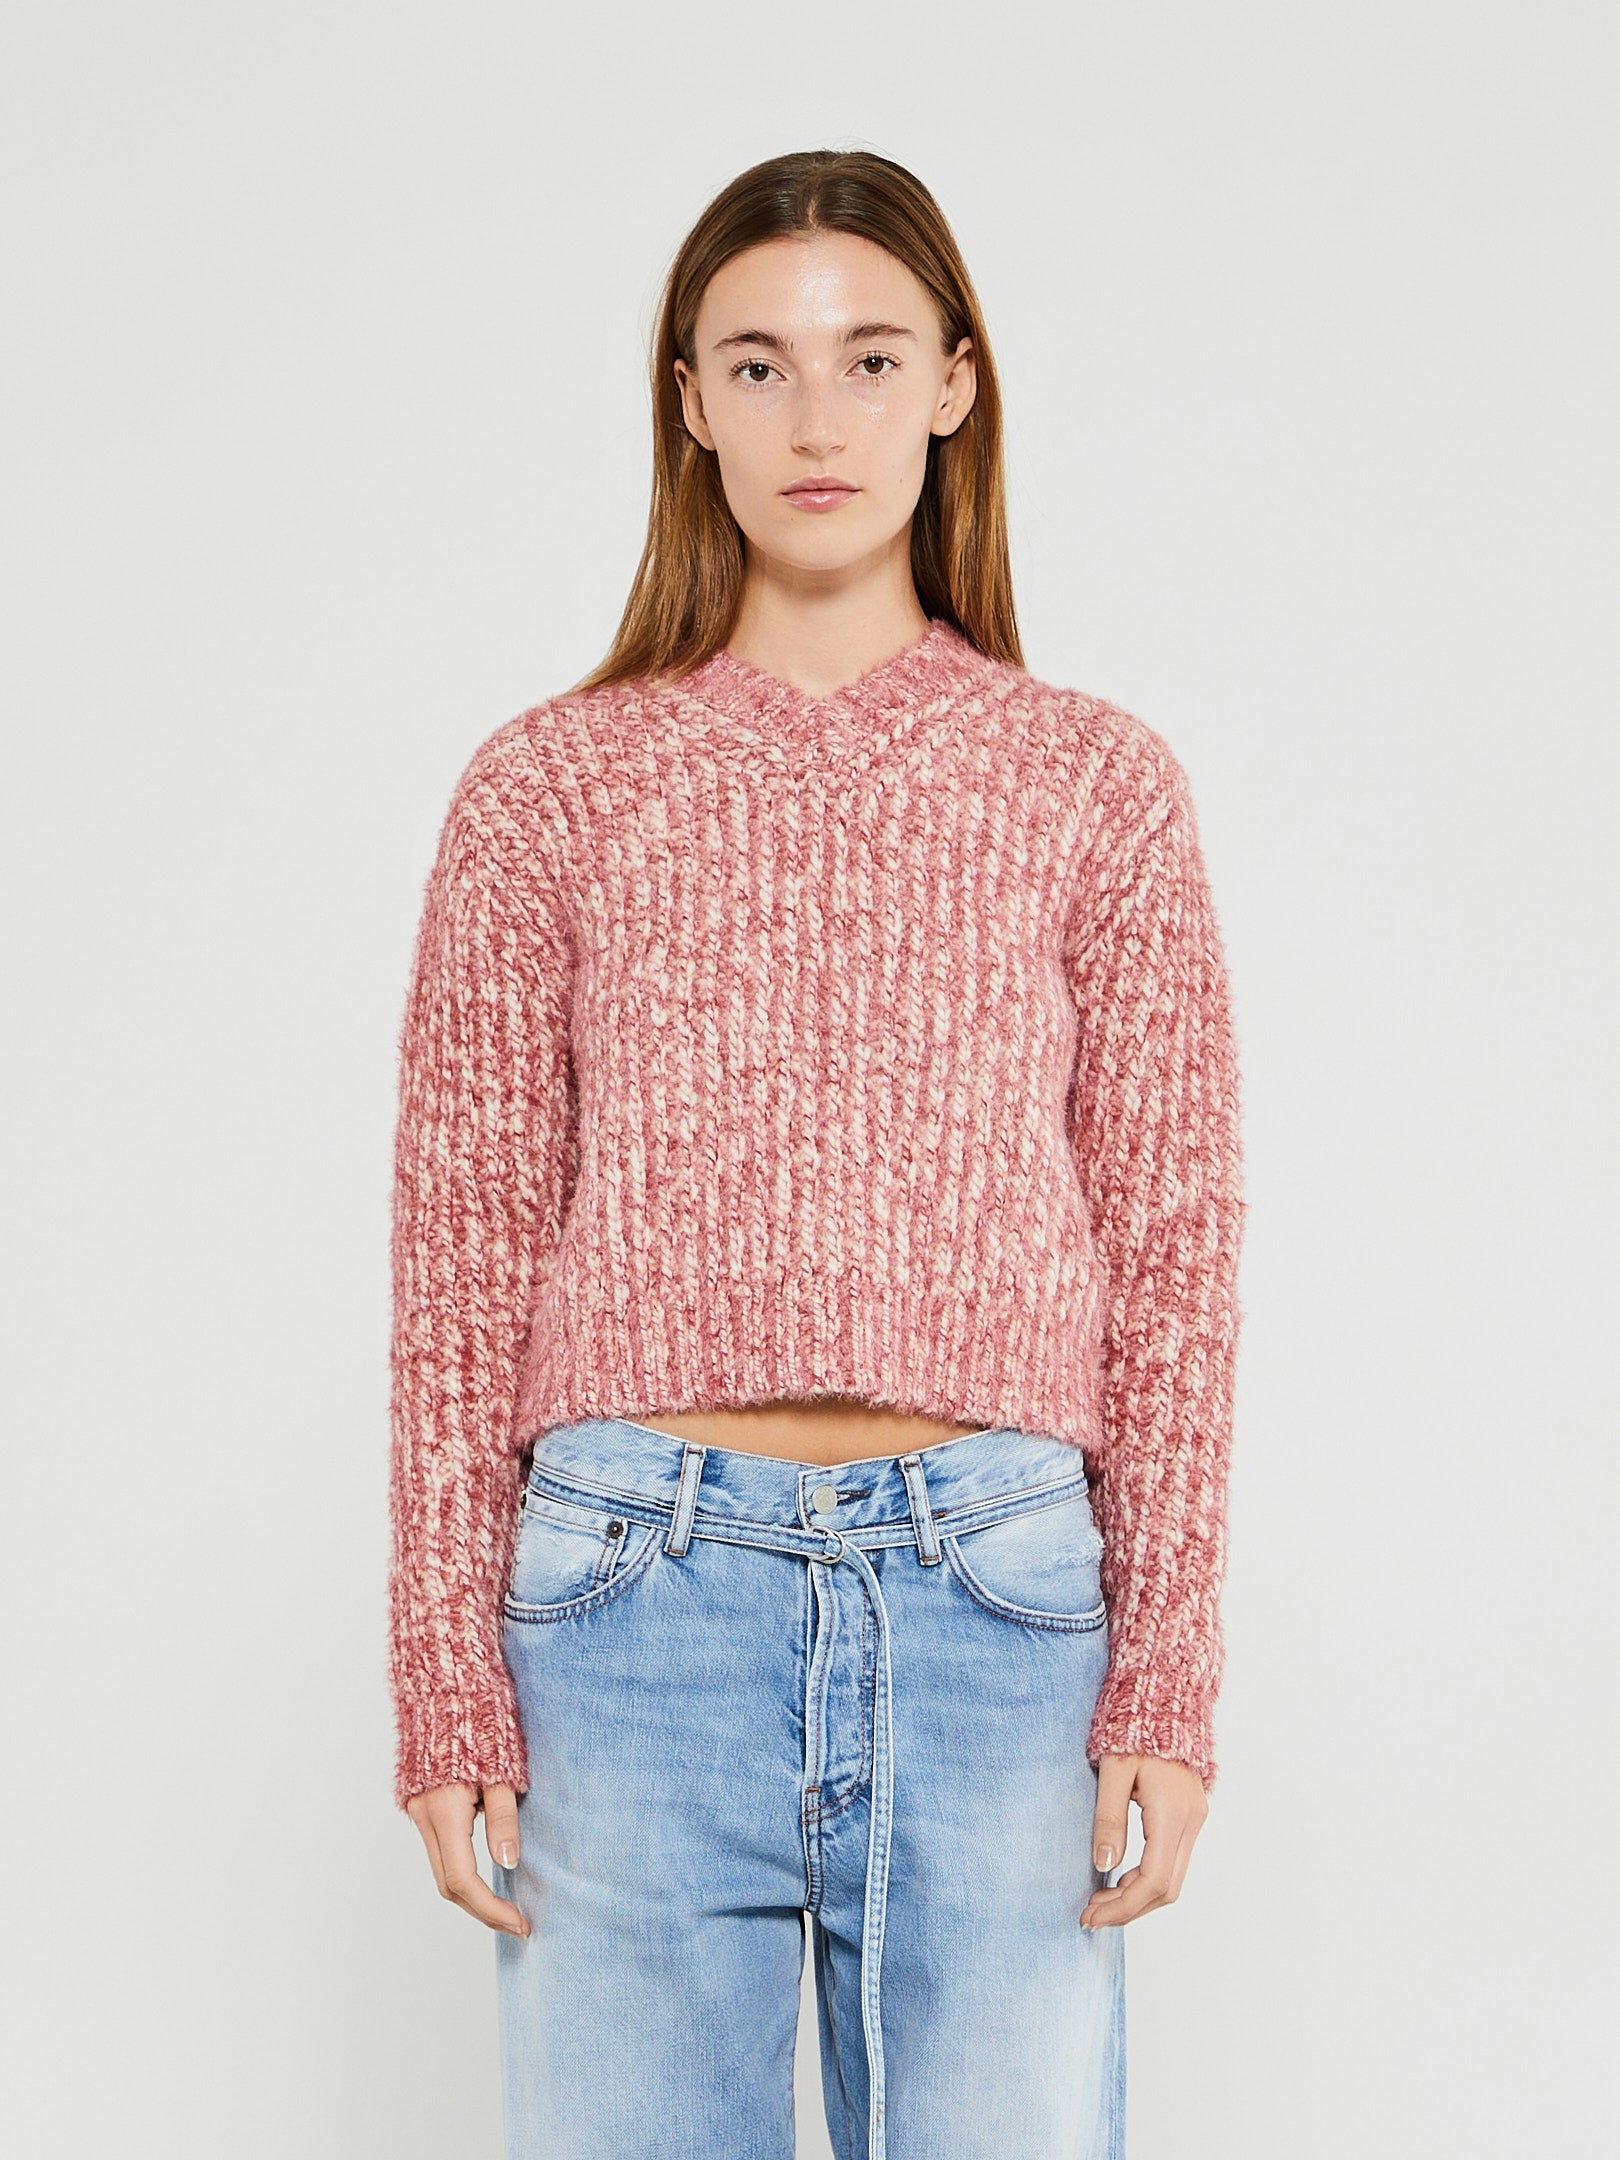 Acne Studios - Knit in Off White and Multi